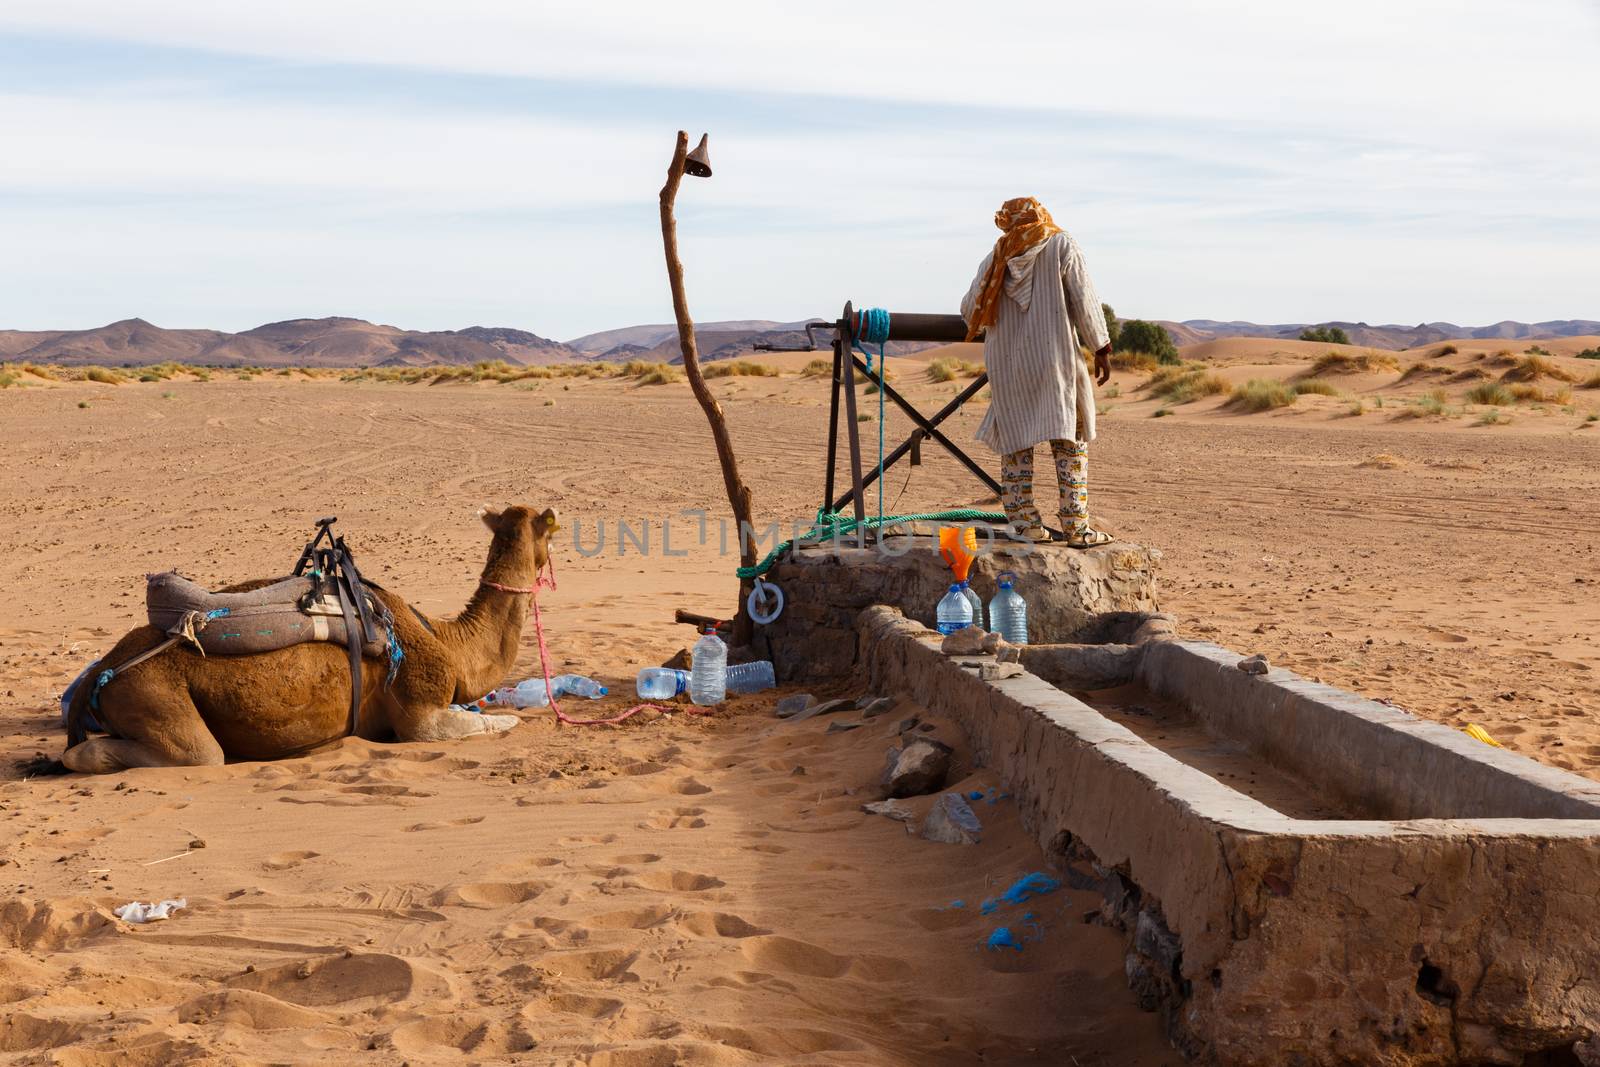 Berber man with camels at the well takes water, Morocco